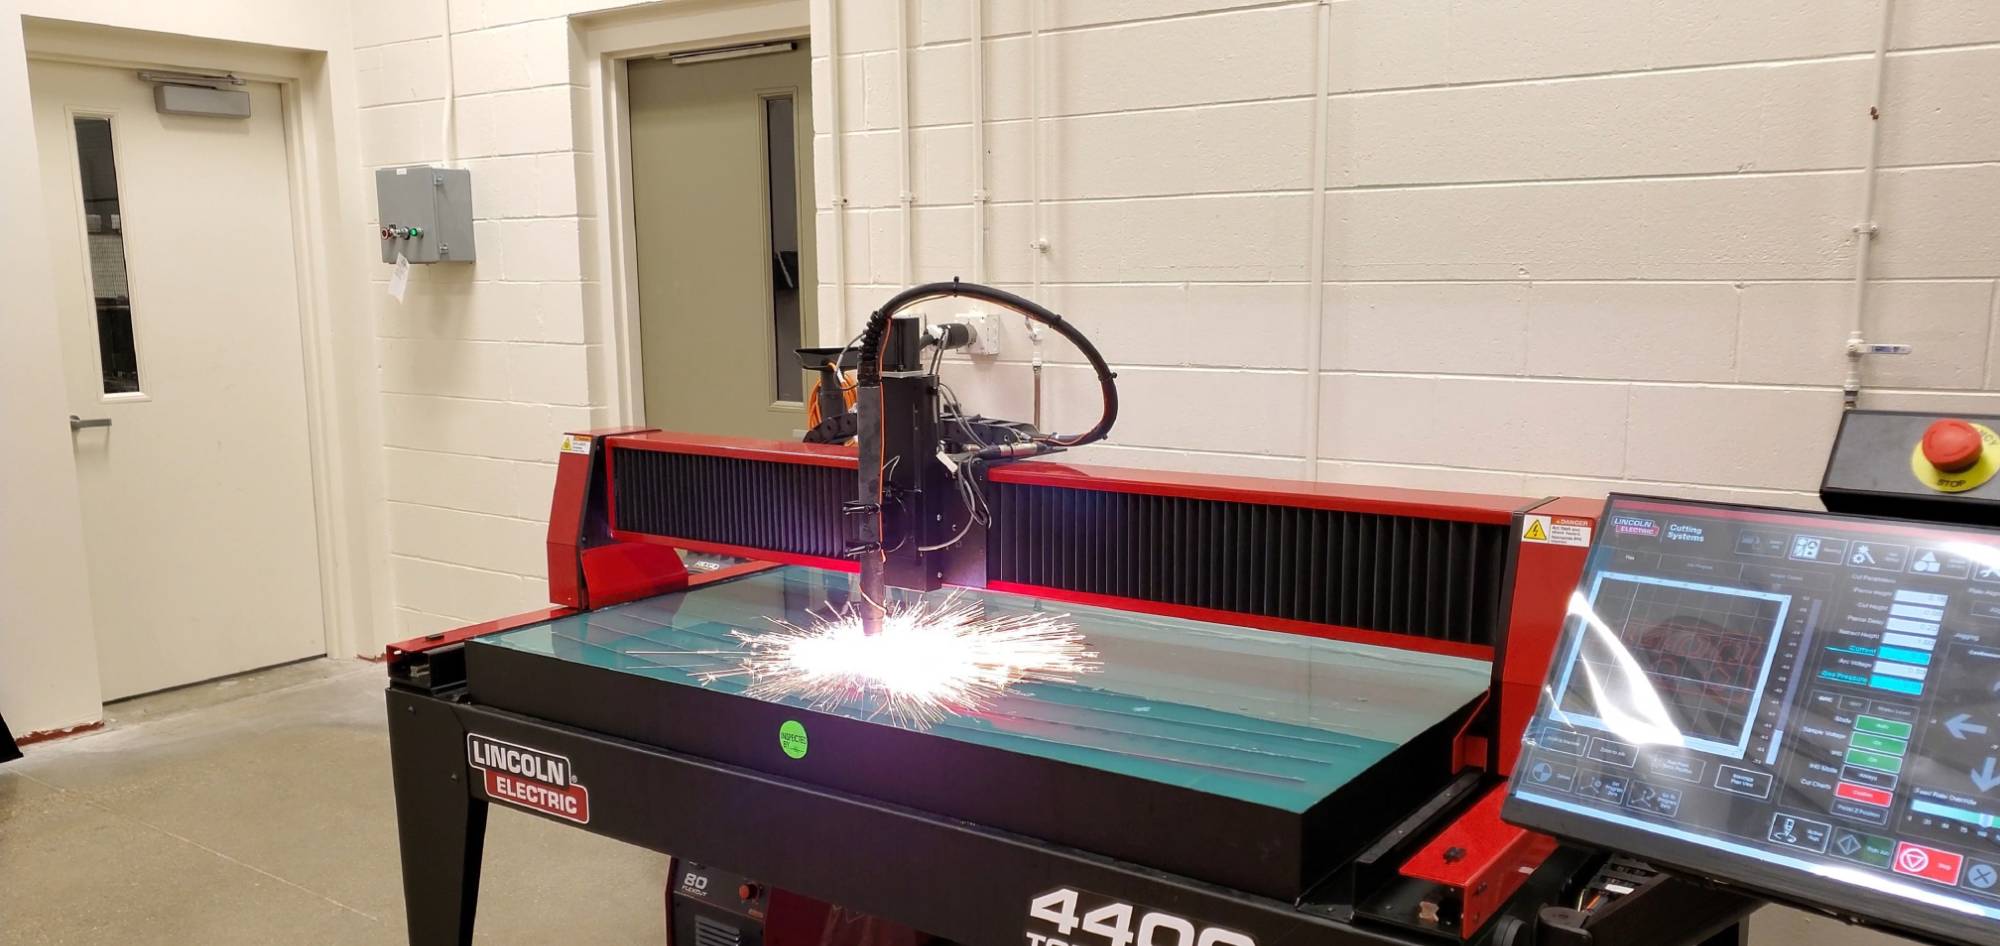 plasma table cutting steel in the fabrication lab